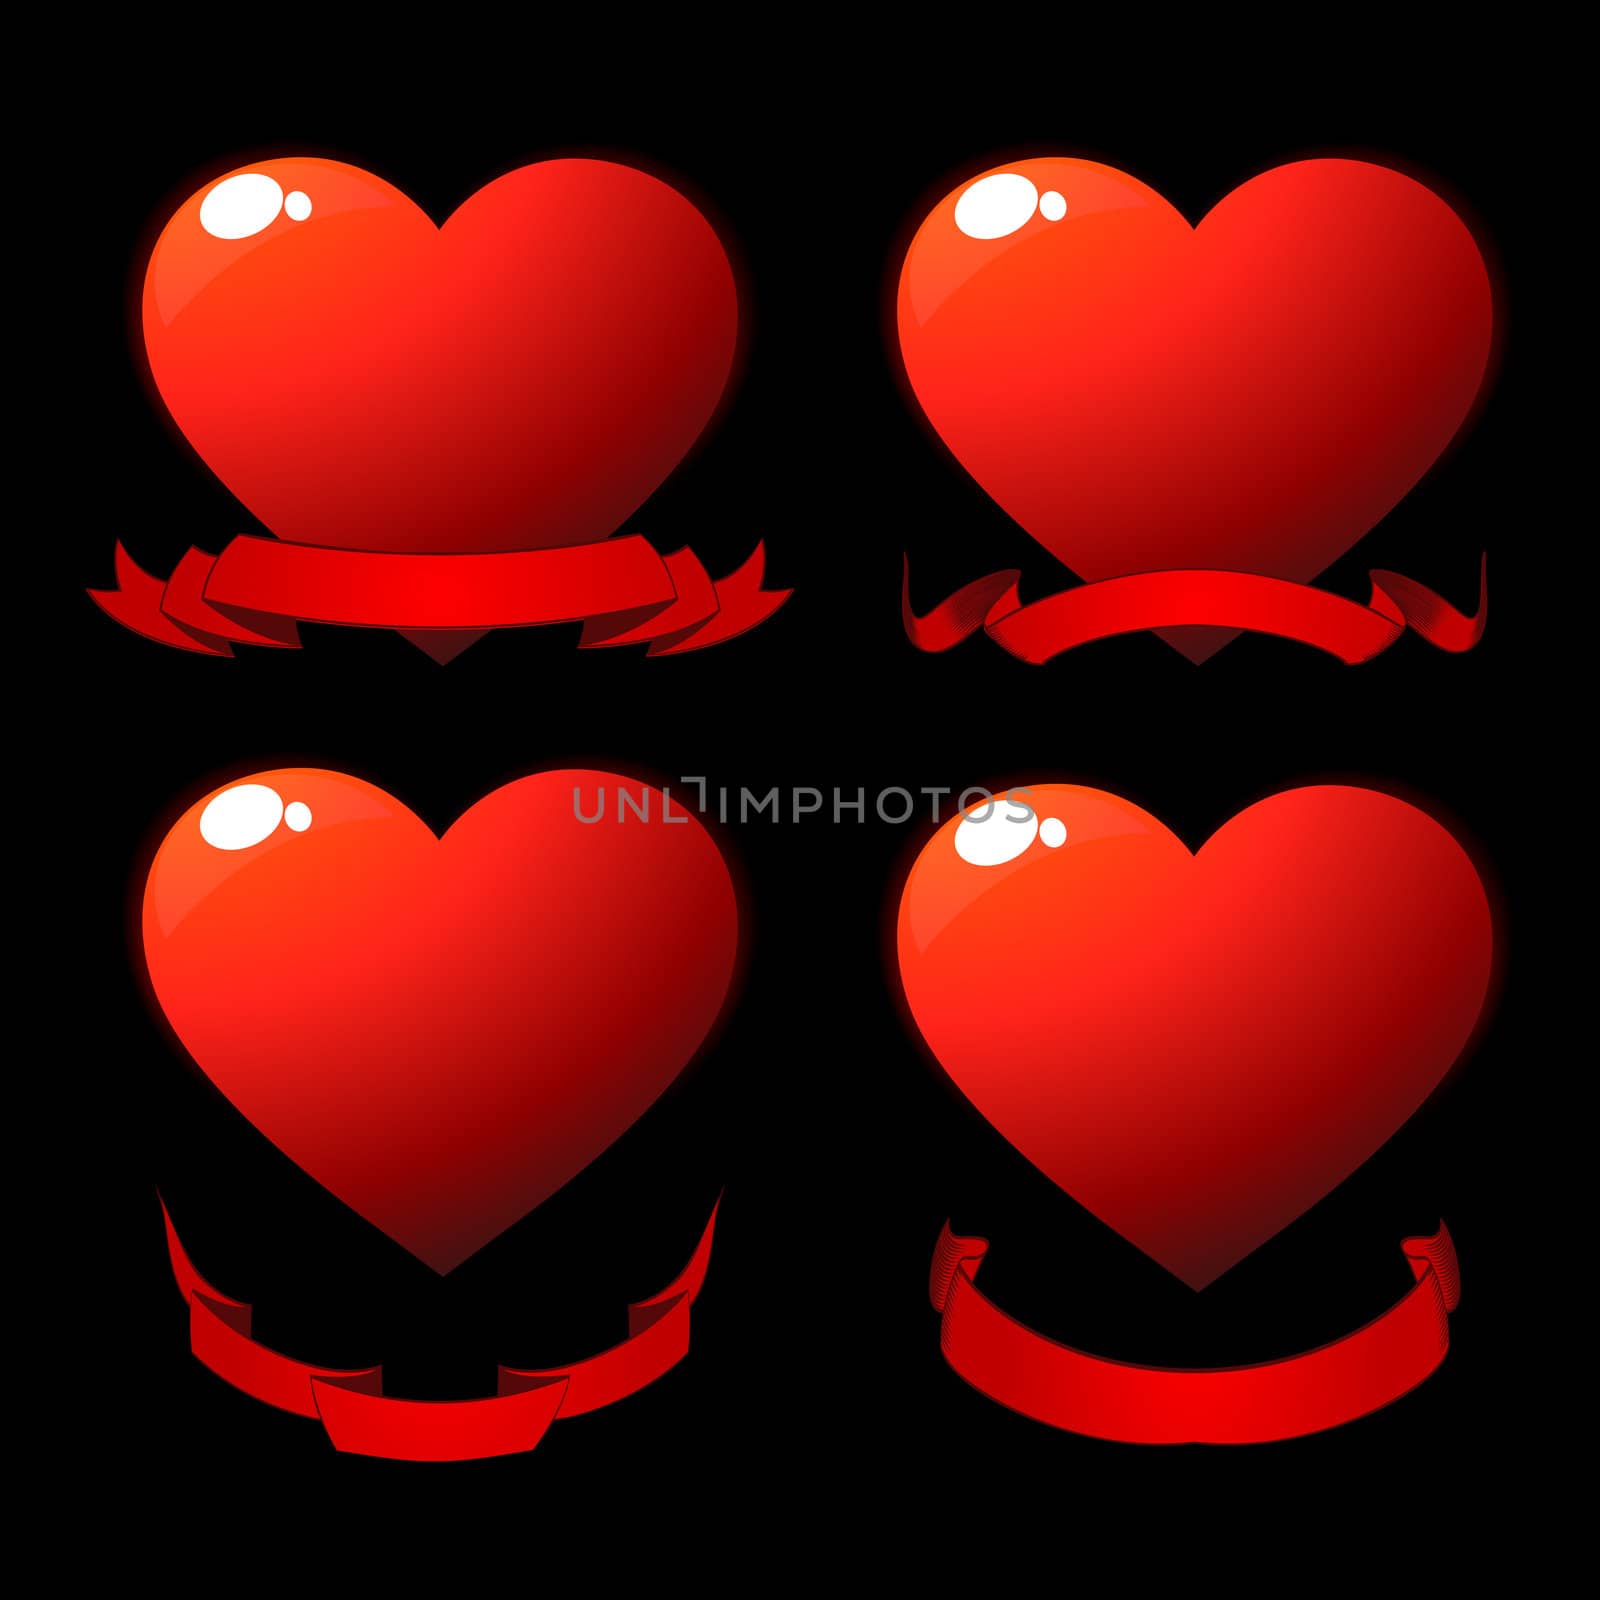 Red shiny hearts with scrolls over black